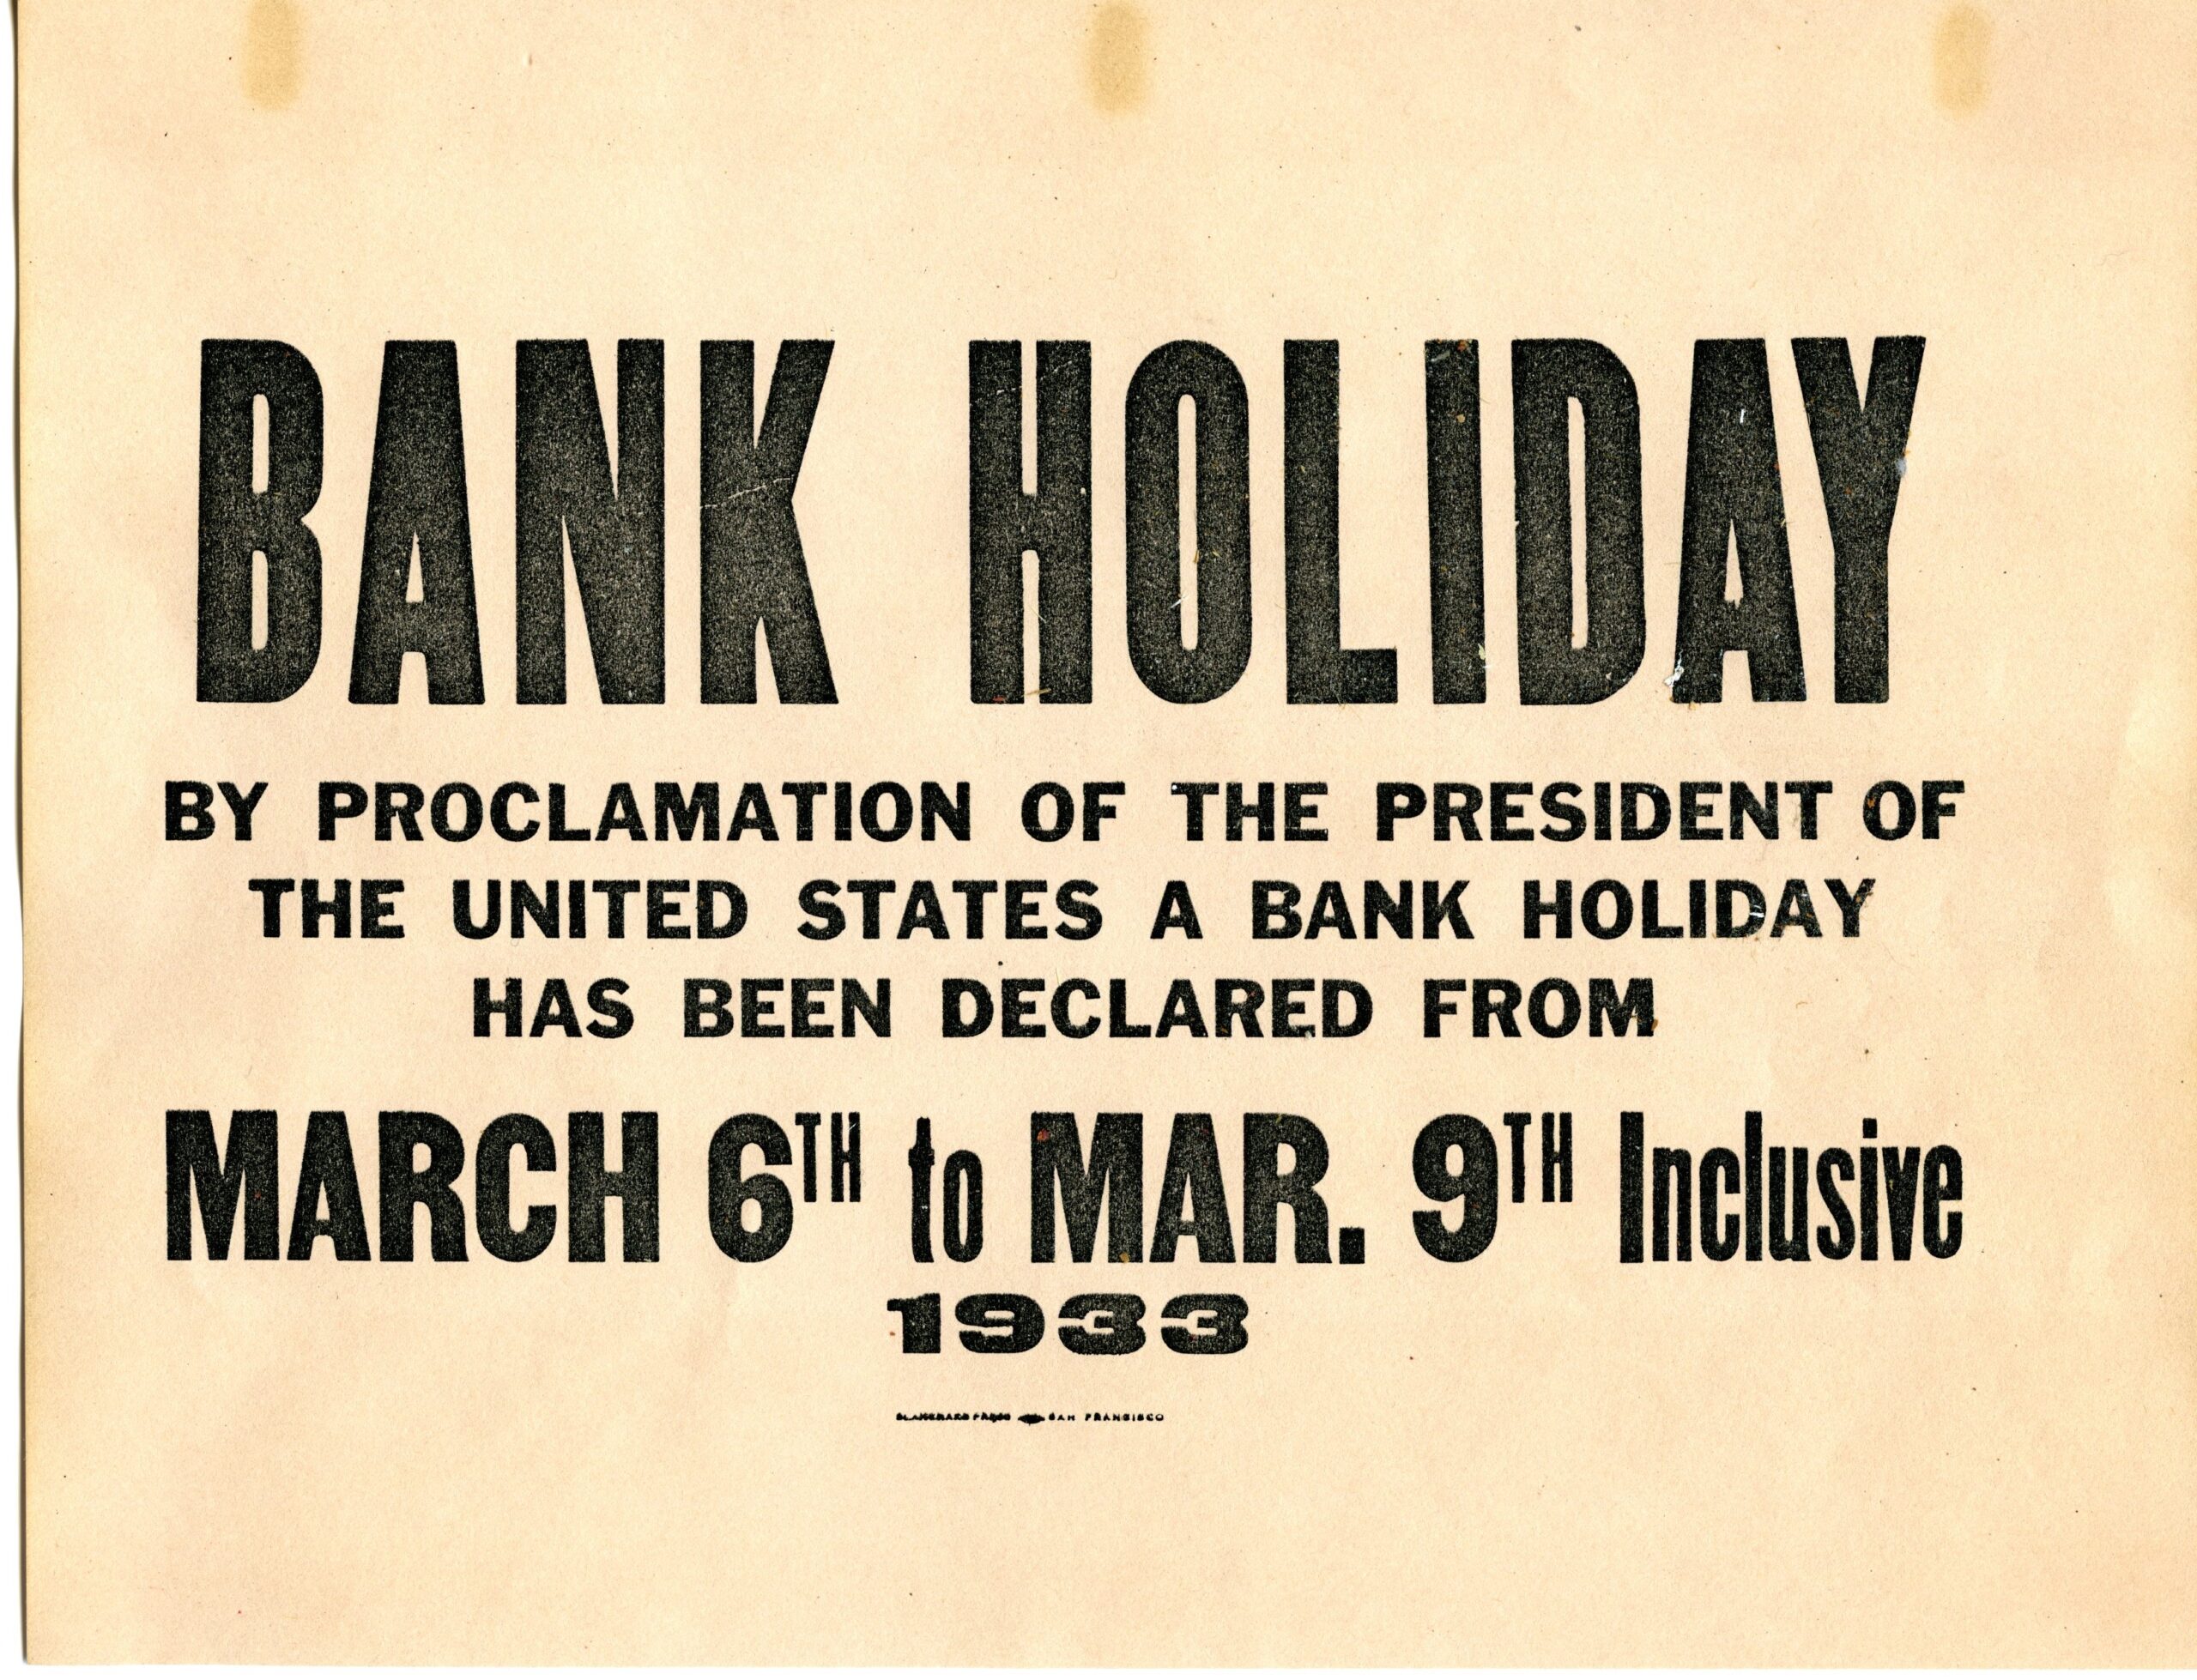 A yellow sign hung on branches from 1933 that reads: Bank Holiday by proclamation of the President of the United States a bank holiday has been declared from March 6th to March 9th Inclusive 1933. Image link will enlarge image.